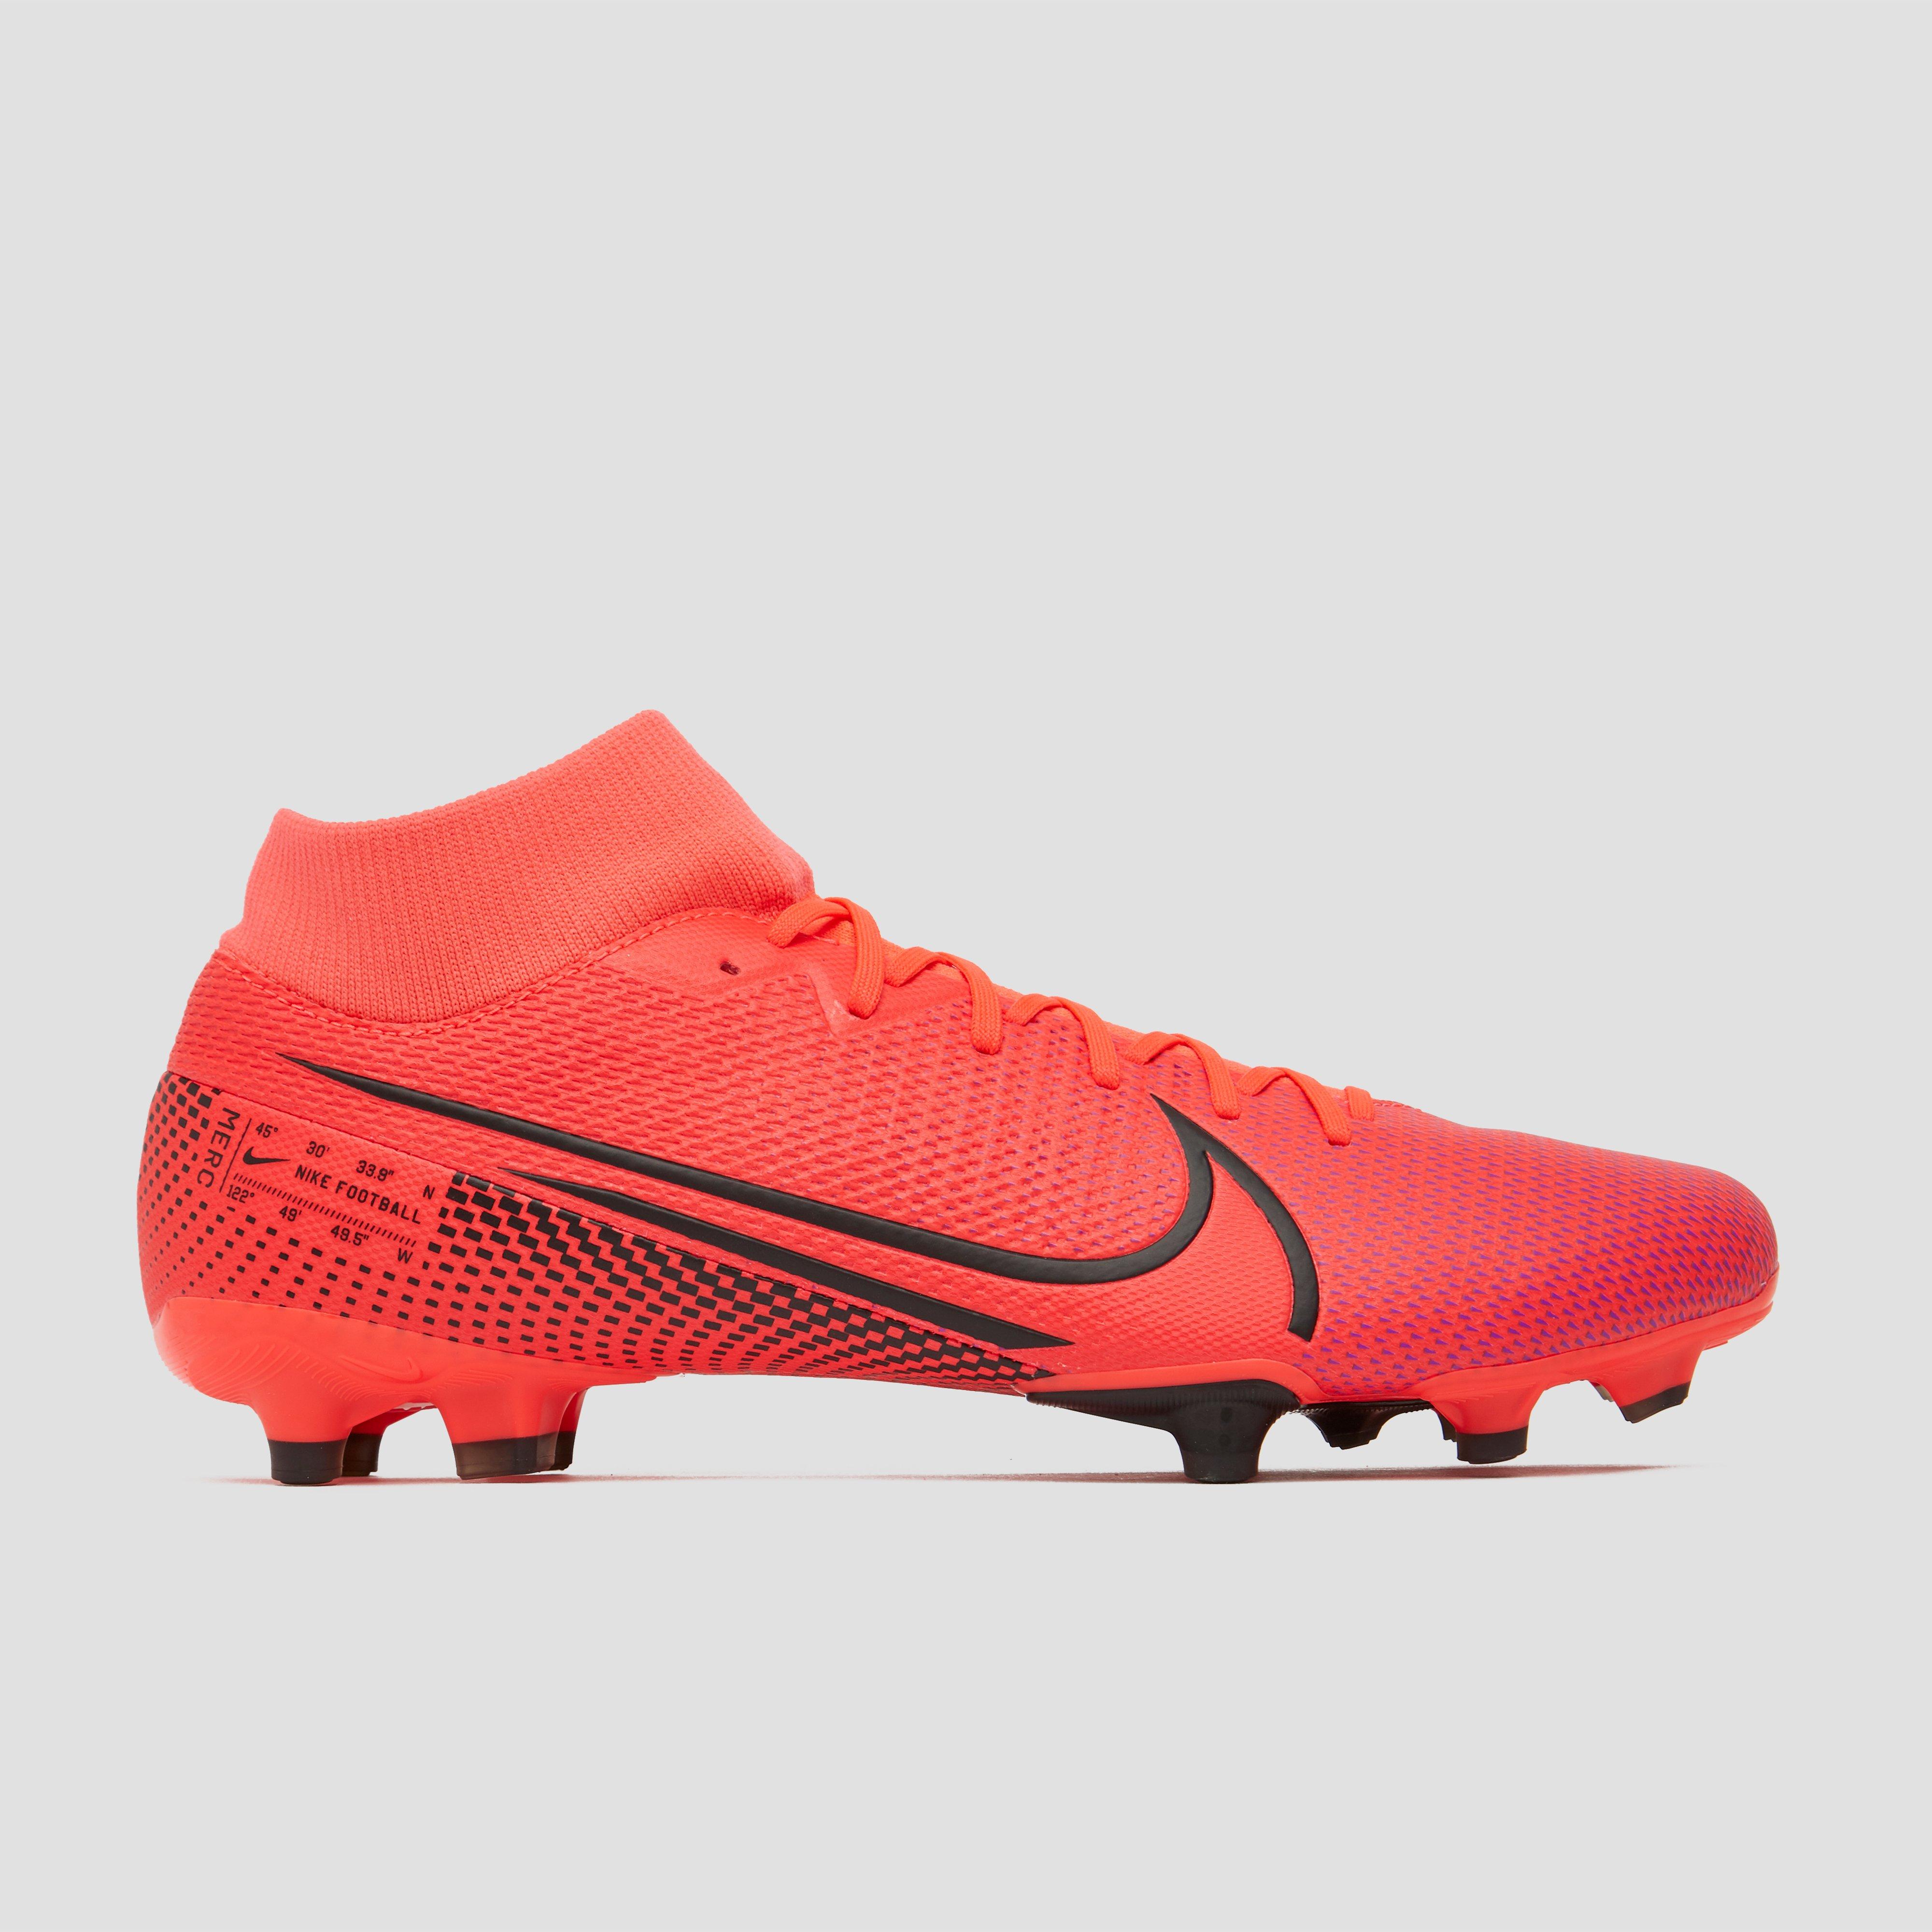 New Nike Mercurial Superfly VI Academy SG Pro Boot Total